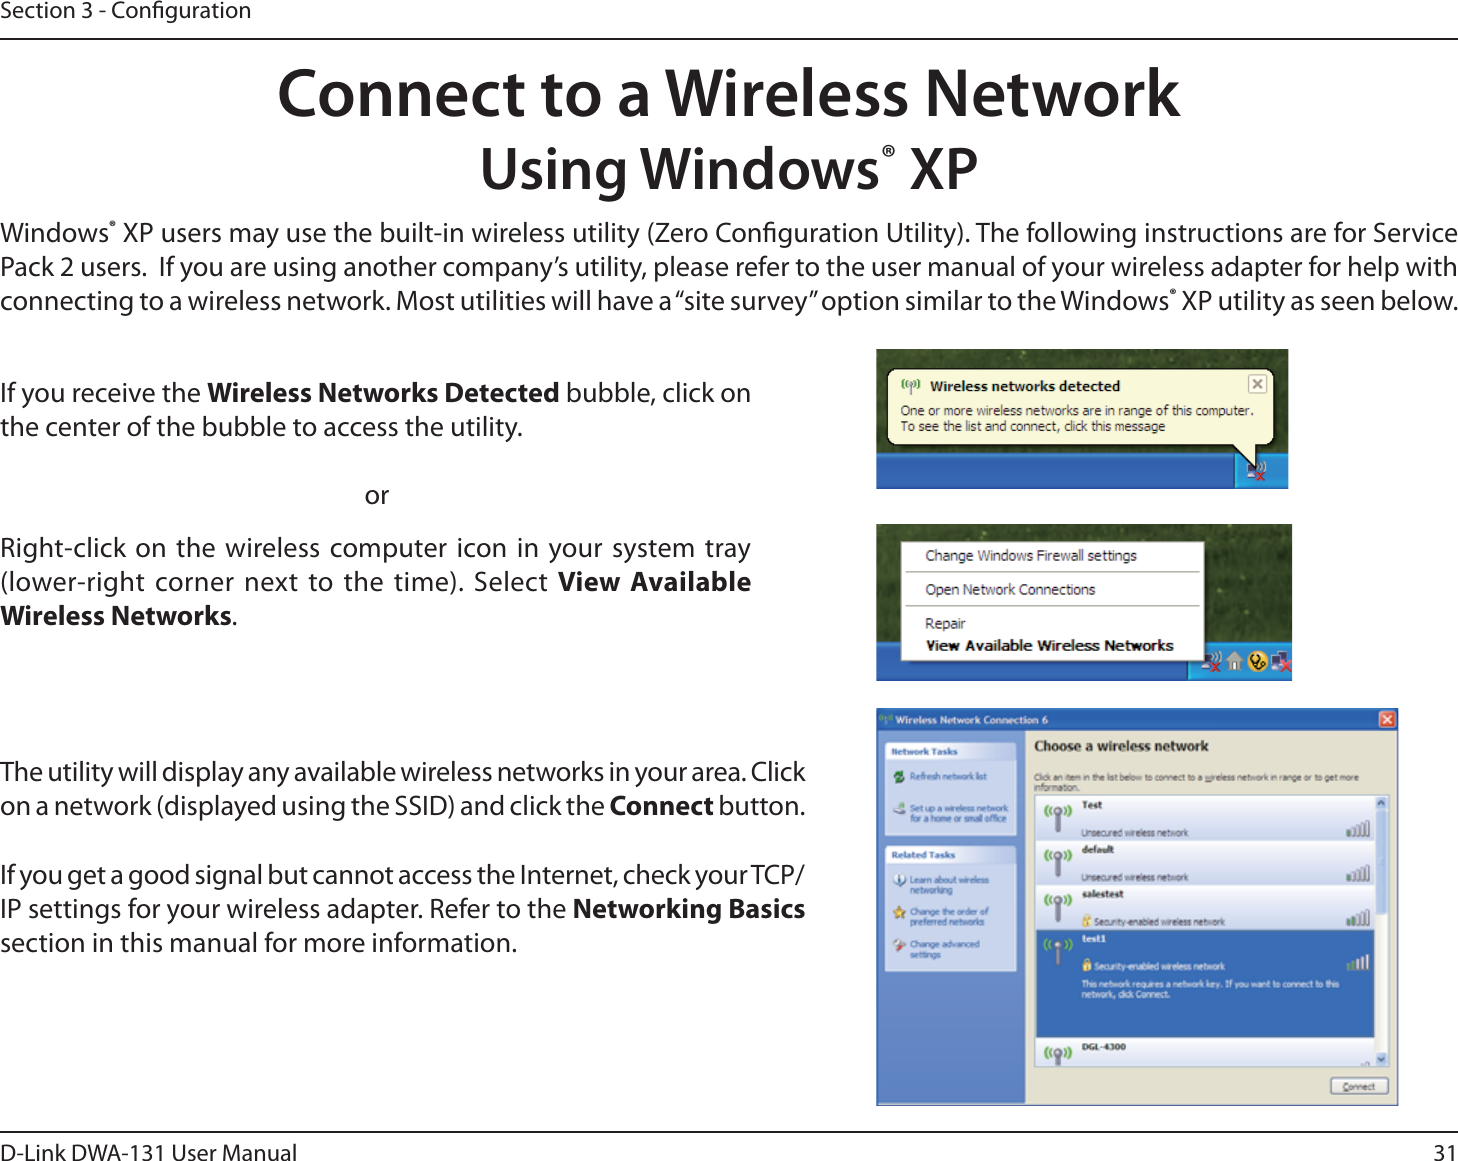 31D-Link DWA-131 User ManualSection 3 - CongurationConnect to a Wireless NetworkUsing Windows® XPWindows® XP users may use the built-in wireless utility (Zero Conguration Utility). The following instructions are for Service Pack 2 users.  If you are using another company’s utility, please refer to the user manual of your wireless adapter for help with connecting to a wireless network. Most utilities will have a “site survey” option similar to the Windows® XP utility as seen below.Right-click on the wireless computer icon in your system tray (lower-right corner next to the time). Select View Available Wireless Networks.If you receive the Wireless Networks Detected bubble, click on the center of the bubble to access the utility.     orThe utility will display any available wireless networks in your area. Click on a network (displayed using the SSID) and click the Connect button.If you get a good signal but cannot access the Internet, check your TCP/IP settings for your wireless adapter. Refer to the Networking Basics section in this manual for more information.